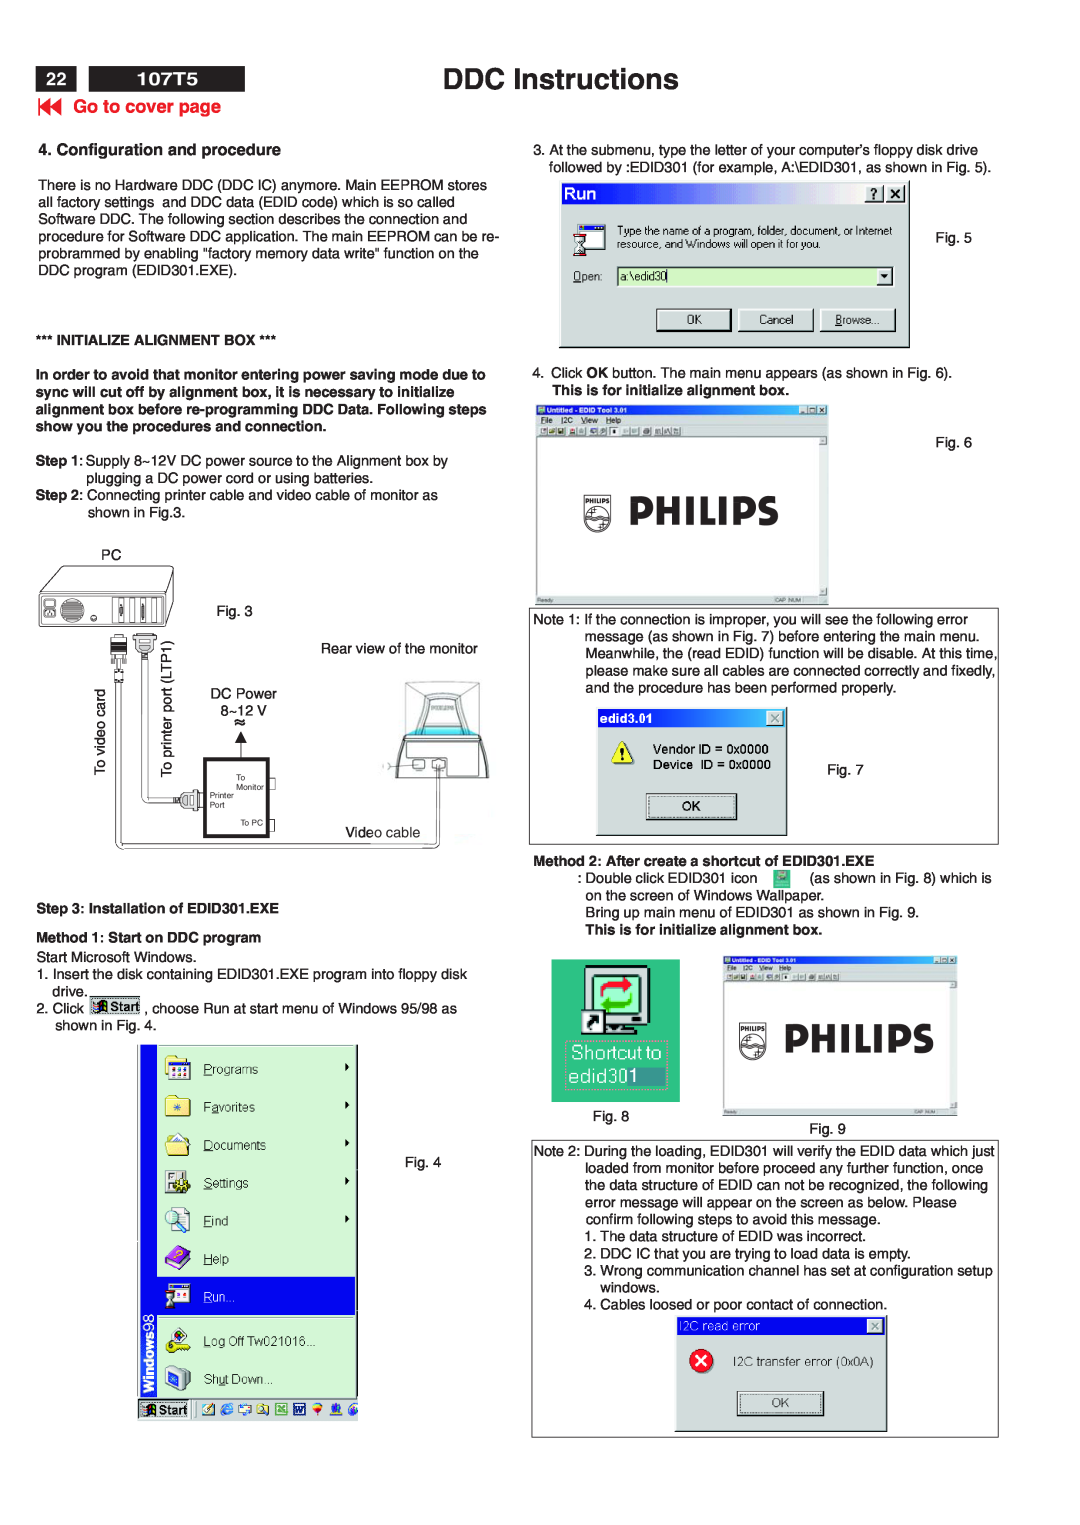 Philips V30 manual DDC Instructions, 107T5, Go to cover page, Configuration and procedure, Initialize Alignment Box 